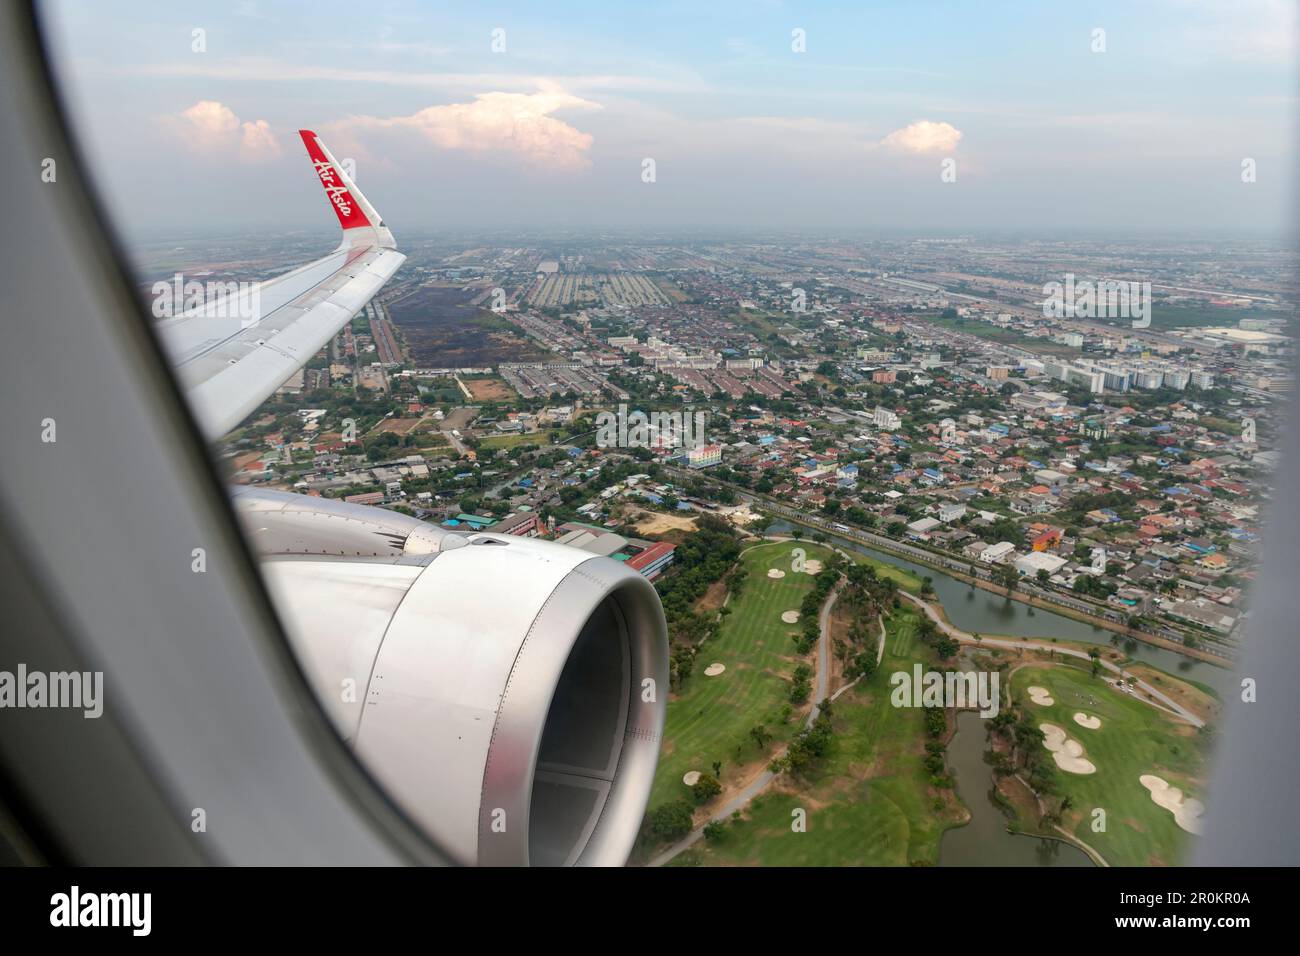 Bangkok Thailand - March 30, 2019:The image depicts the view outside the window showing the wing and engine of an AirAsia low-cost airline aircraft du Stock Photo